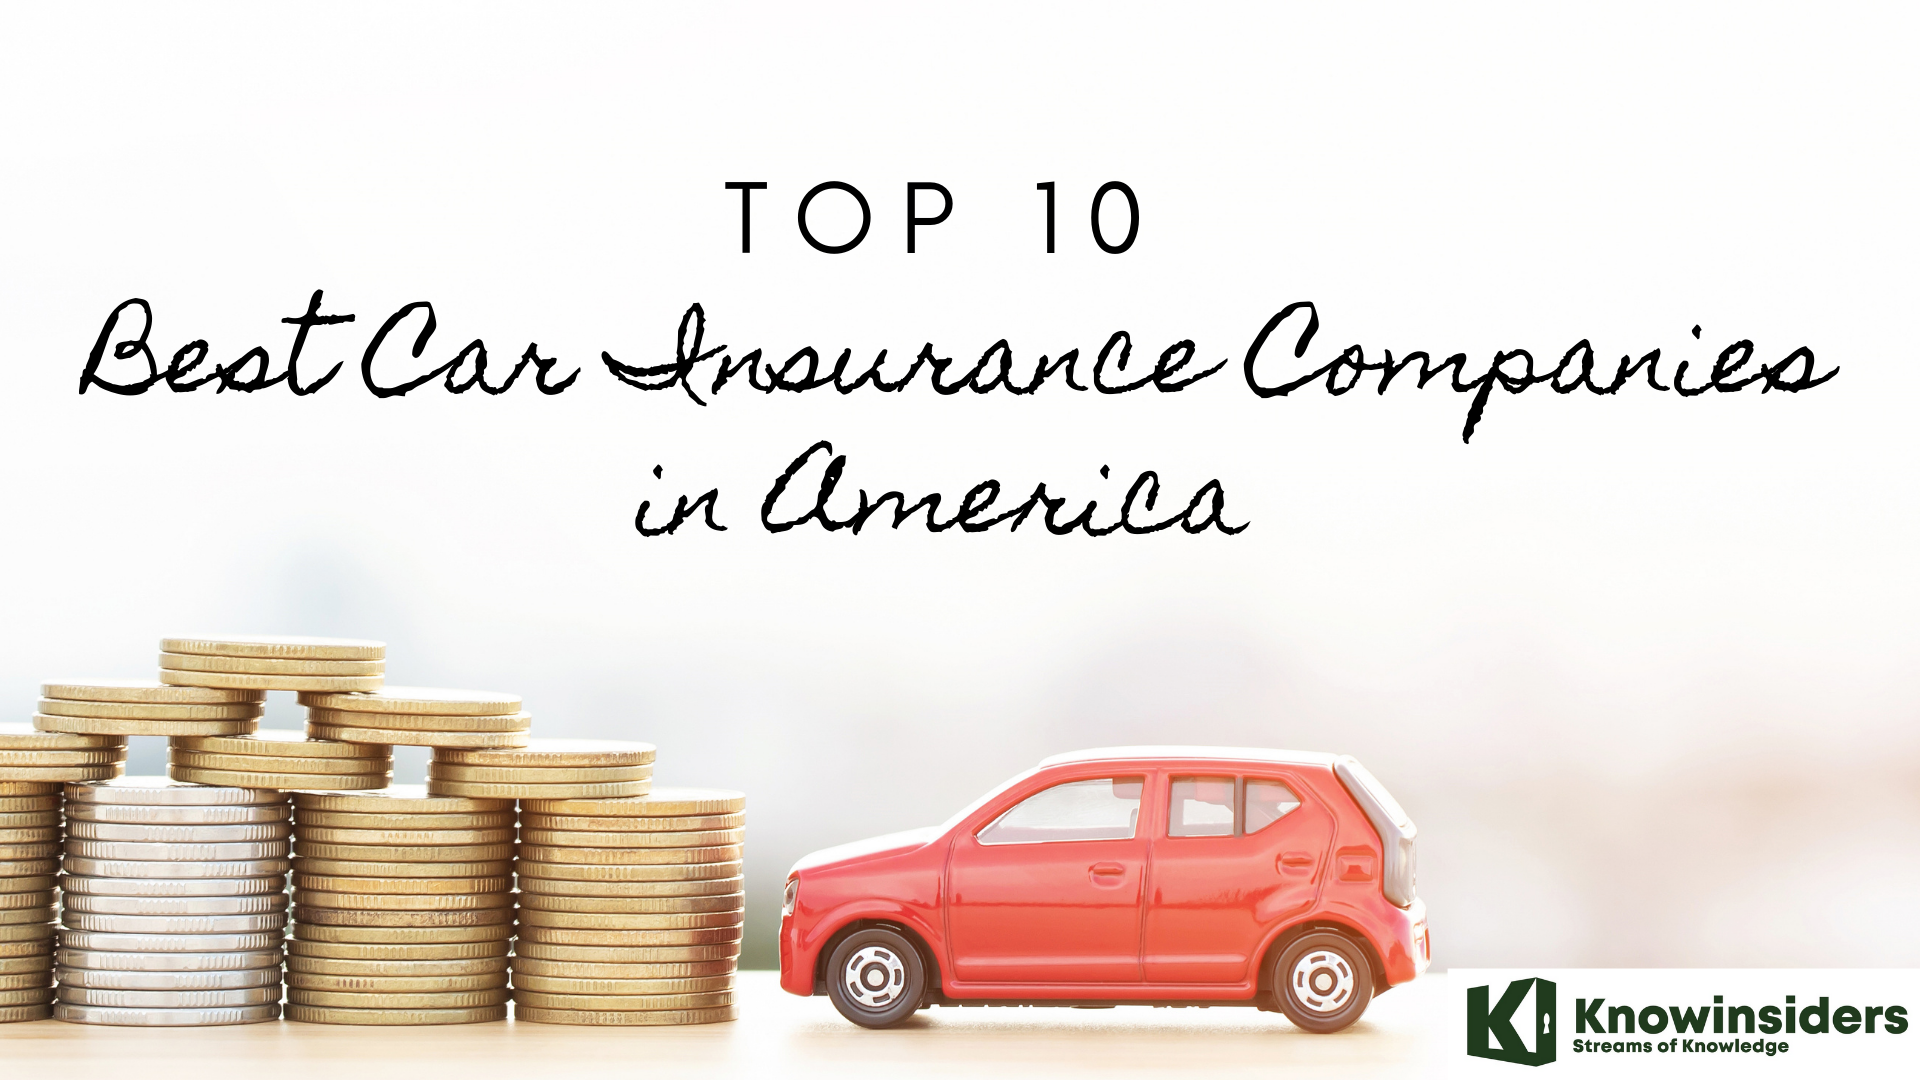 Top 10 Best Car Insurance Companies With Cheap and Good Comprehensive in America